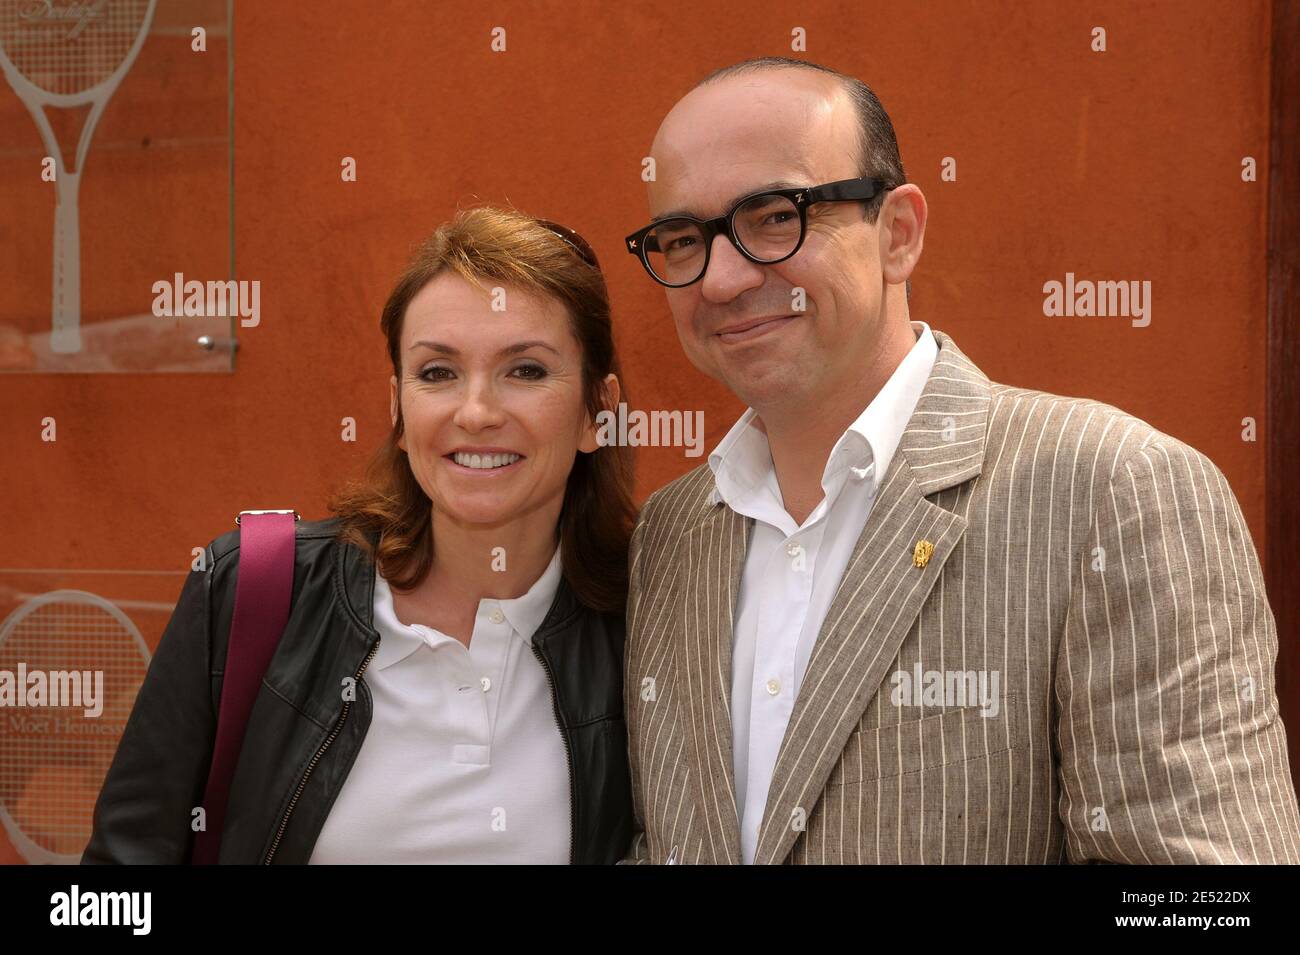 Karl Zero and wife Daisy Derata arriving at the VIP area 'Le Village'  during the 2008 French Tennis Open at Roland Garros arena in Paris, France  on June 5, 2008. Photo by